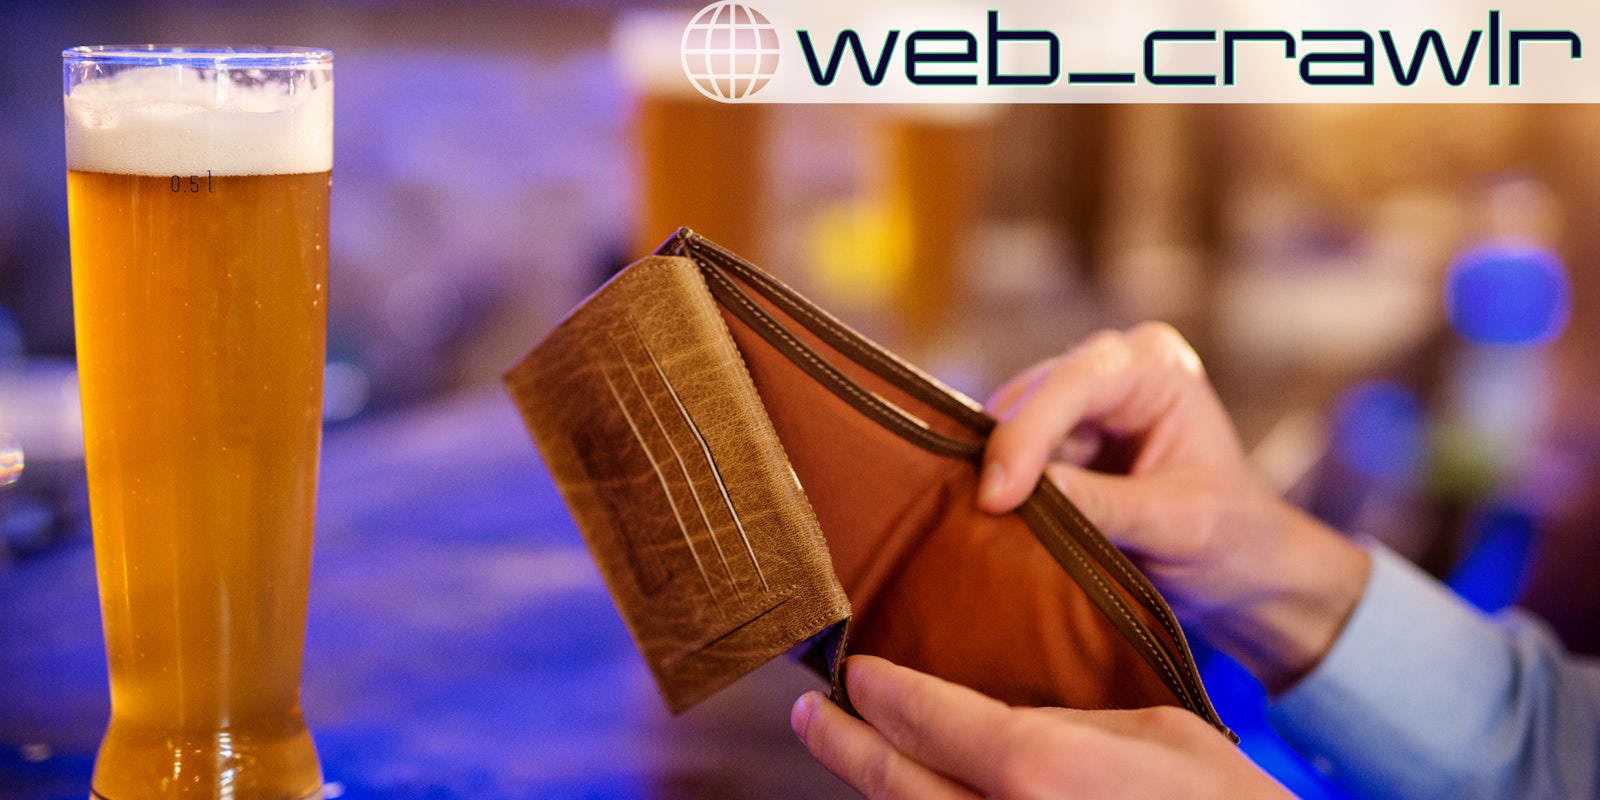 A beer glass next to a person with an empty wallet. The Daily Dot newsletter web_crawlr logo is in the top right corner.